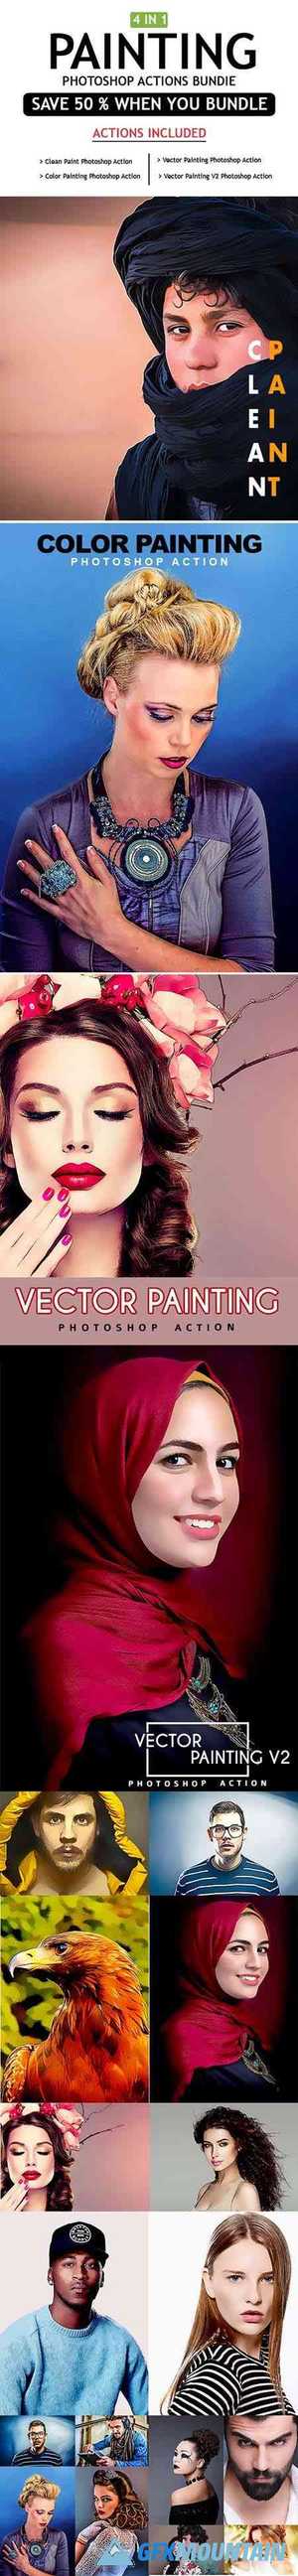 Painting 4 IN 1 Photoshop Actions Bundle - 25490966